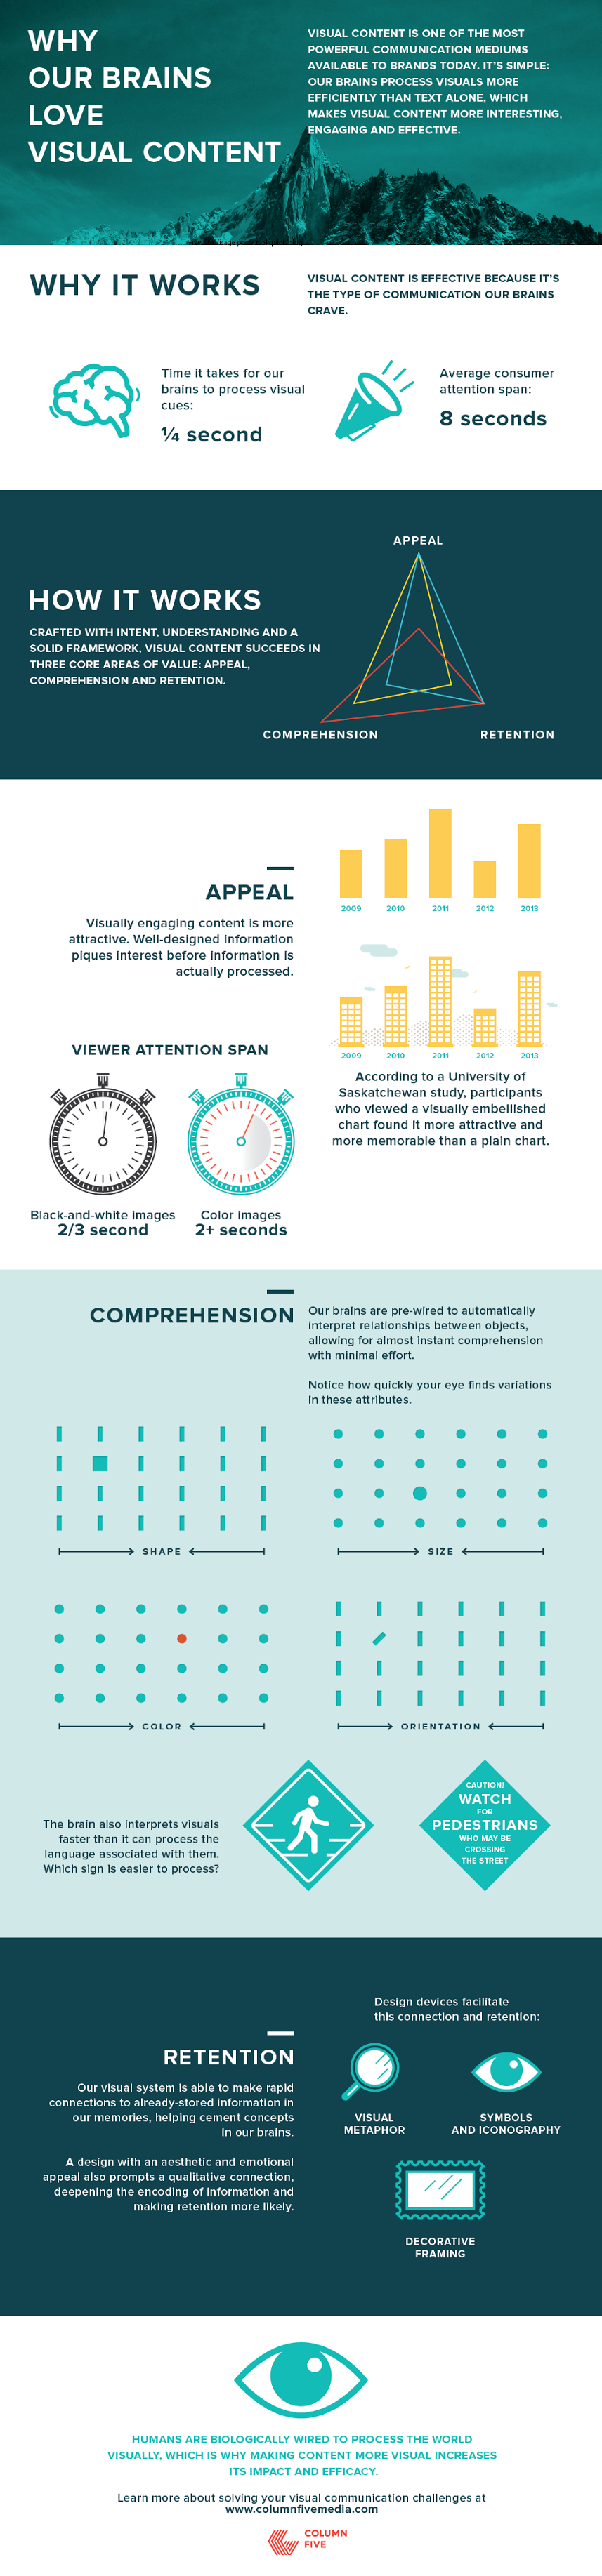 Why Our Brain Loves Visual Content - #infographic #Contentmarketing #socialmedia - Humans are biologically wired to process the world visually, which is why making content more visual increases its impact and efficacy.